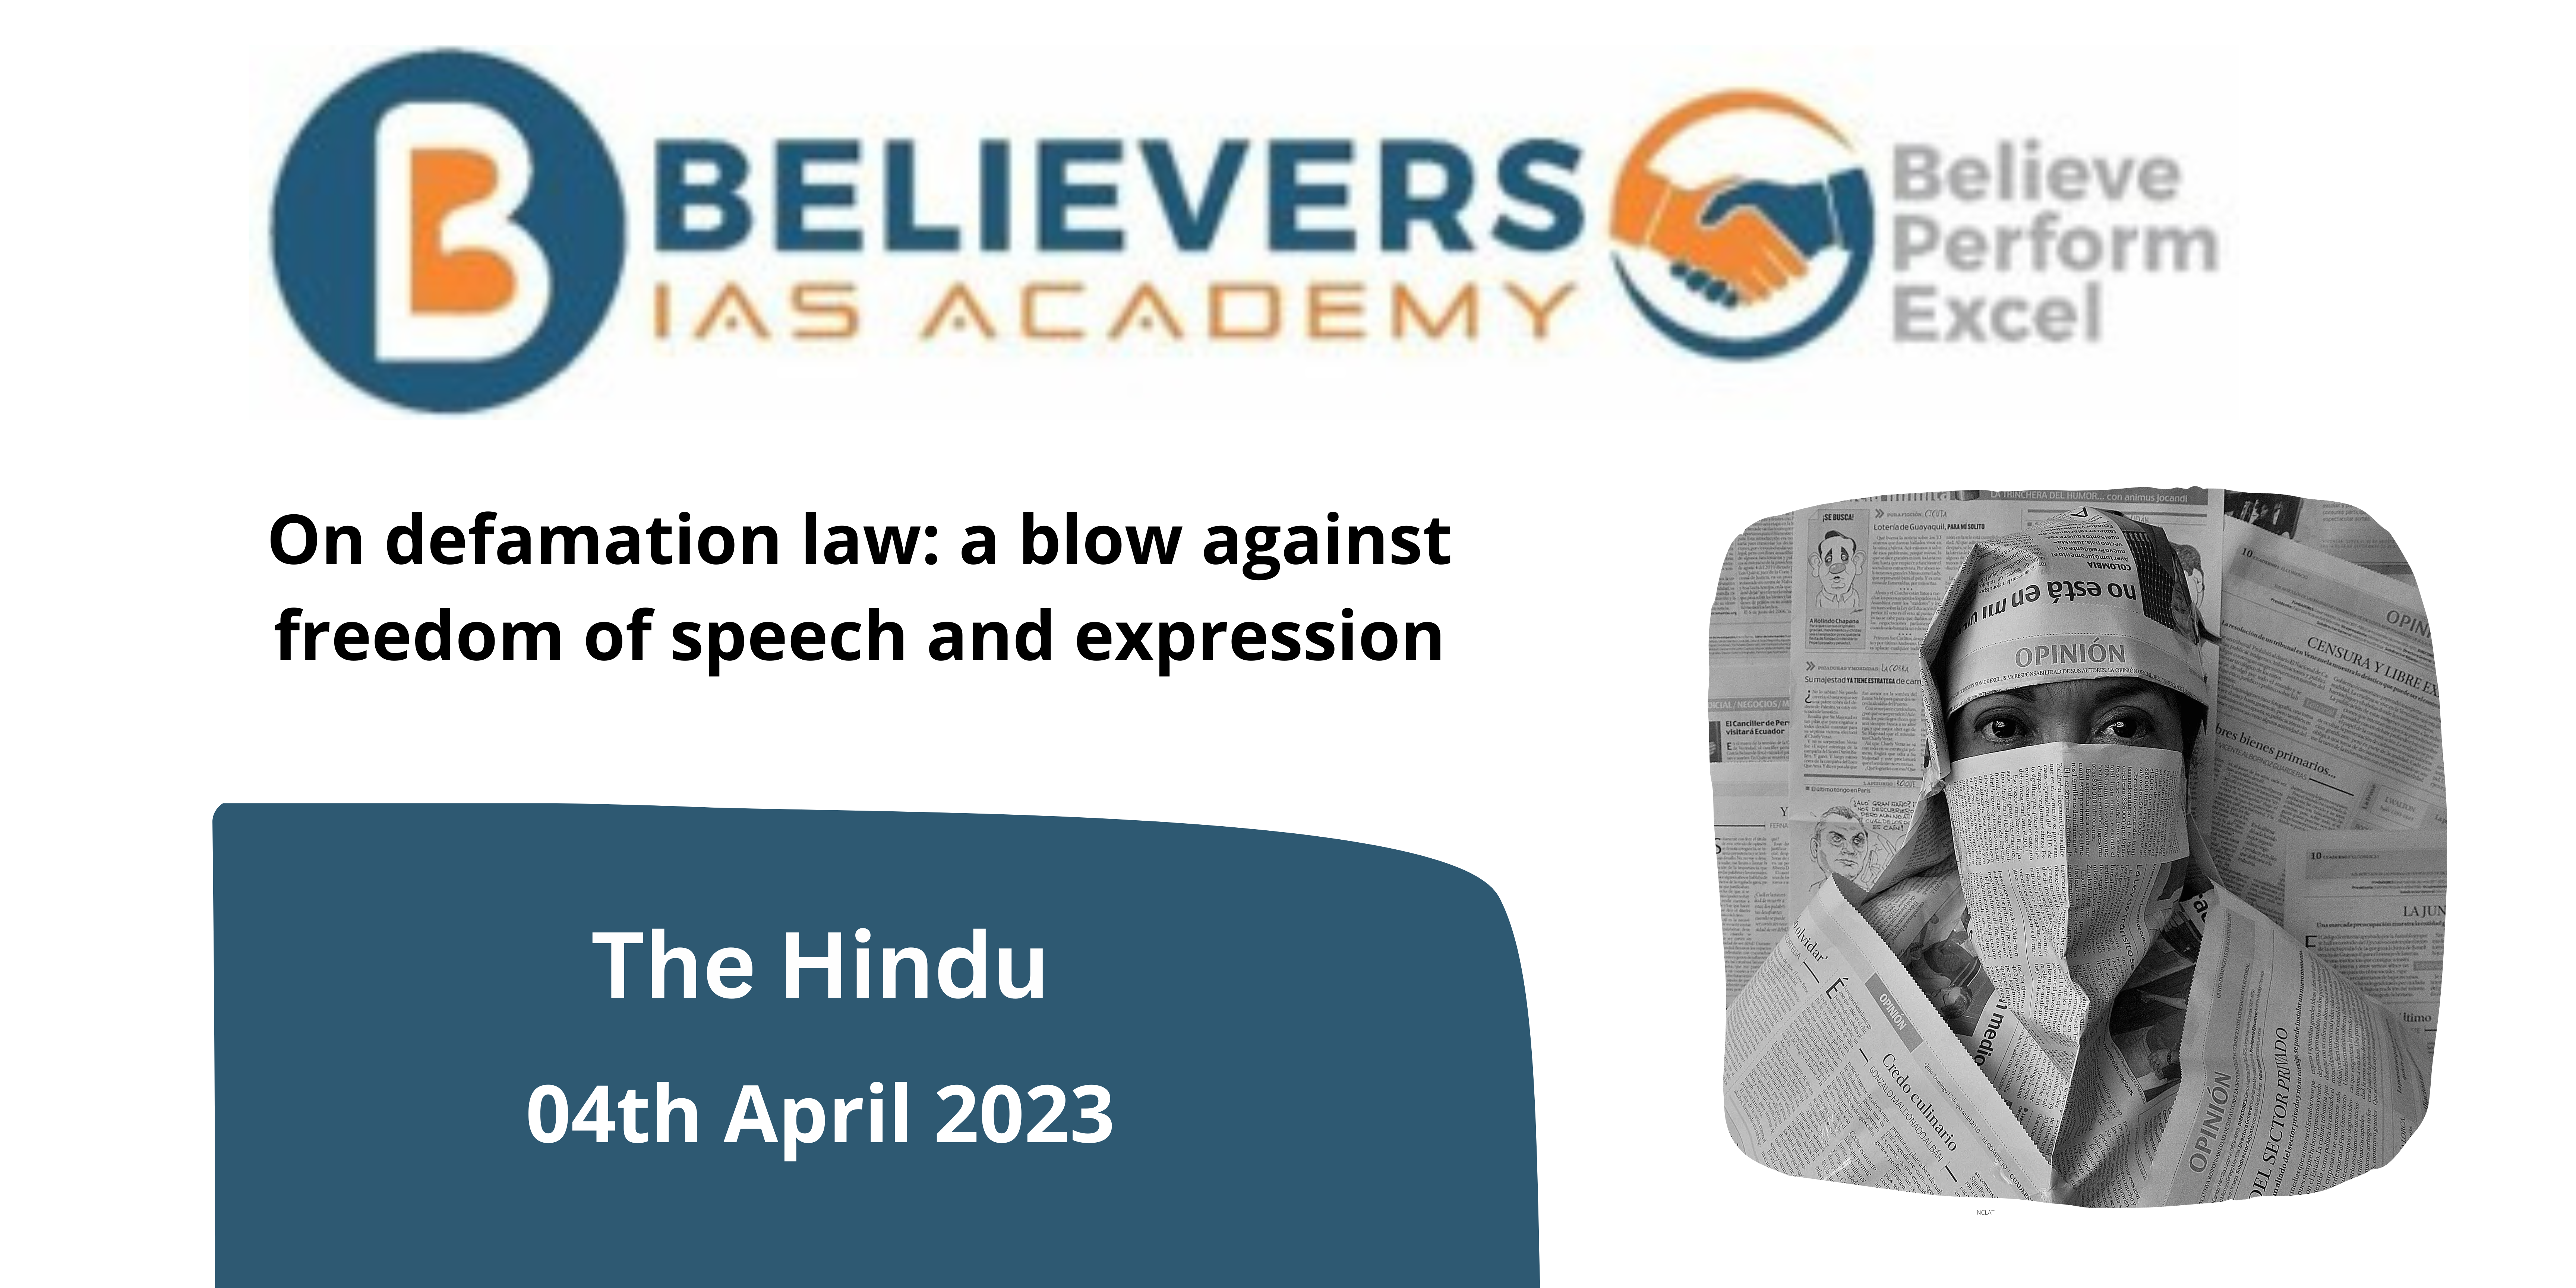 On defamation law: a blow against freedom of speech and expression